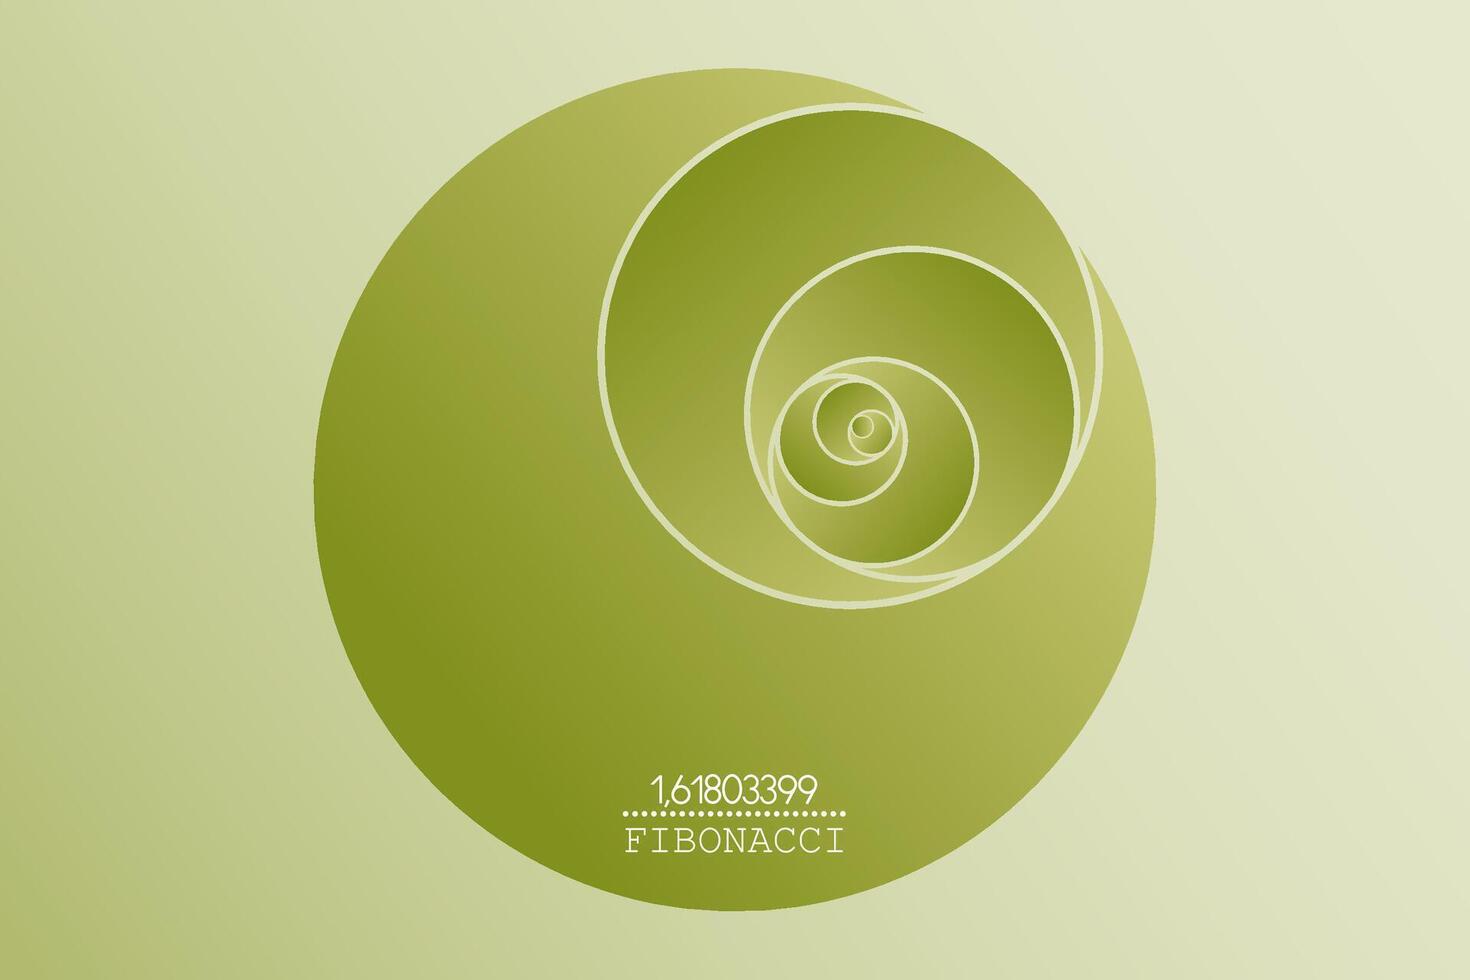 Fibonacci Sequence Circle. Golden ratio. 3D Geometric shapes spiral. Green gradient Circles in golden proportion, minimalist design. Vector circular Logo icon isolated on light green background